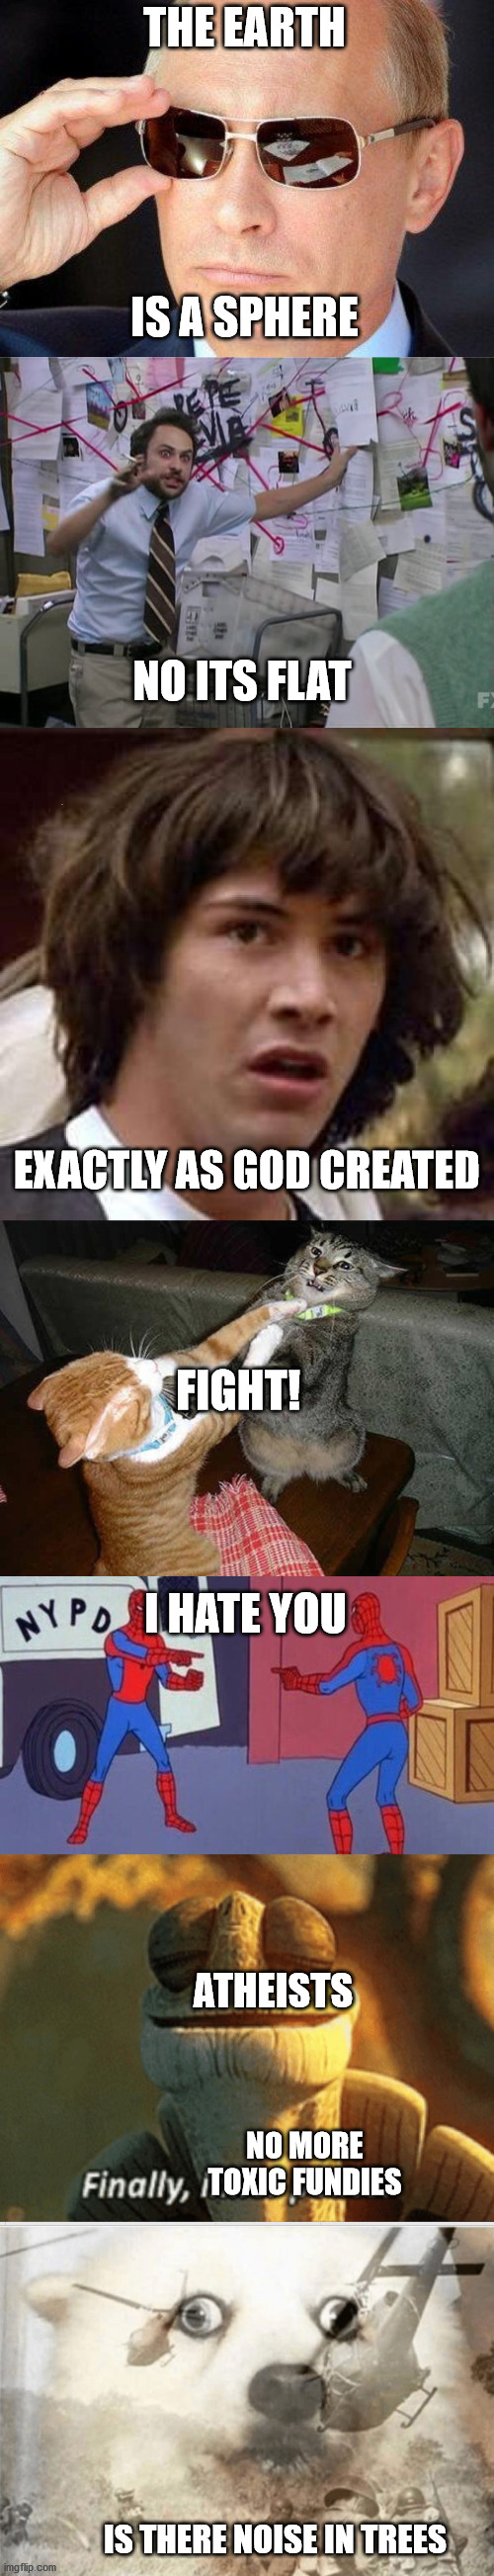 Long Meme, Part 2 (Flat v. Round) | THE EARTH; IS A SPHERE; NO ITS FLAT; EXACTLY AS GOD CREATED; FIGHT! I HATE YOU; ATHEISTS; NO MORE TOXIC FUNDIES; IS THERE NOISE IN TREES | image tagged in putin cool guy,charlie conspiracy always sunny in philidelphia,memes,conspiracy keanu,two cats fighting for real,ptsd dog | made w/ Imgflip meme maker